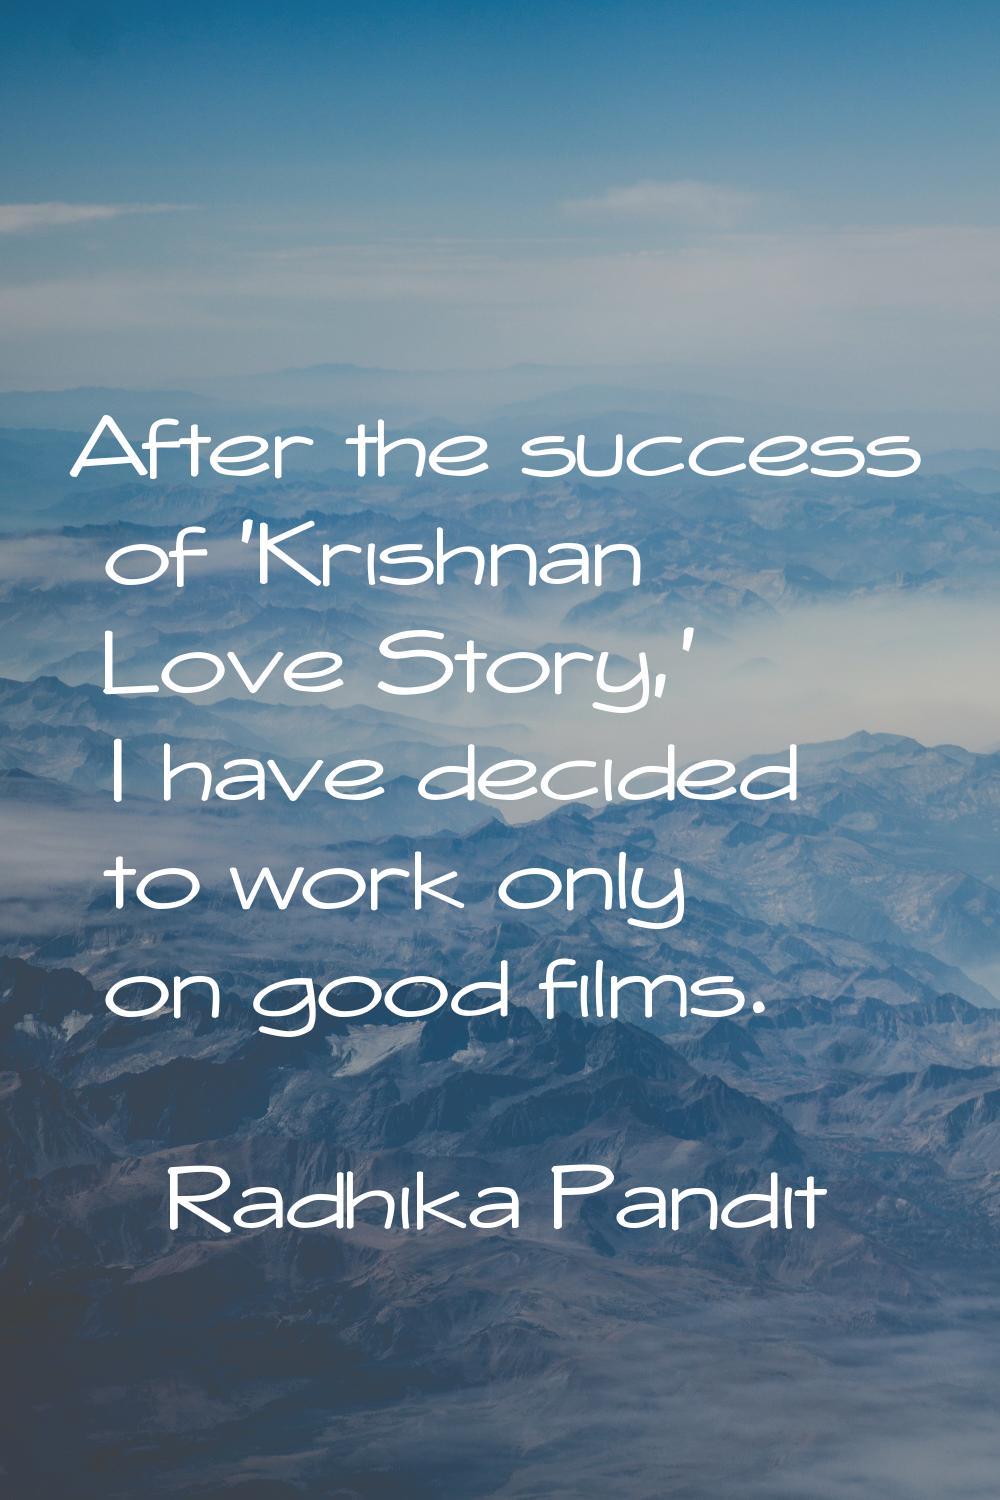 After the success of 'Krishnan Love Story,' I have decided to work only on good films.